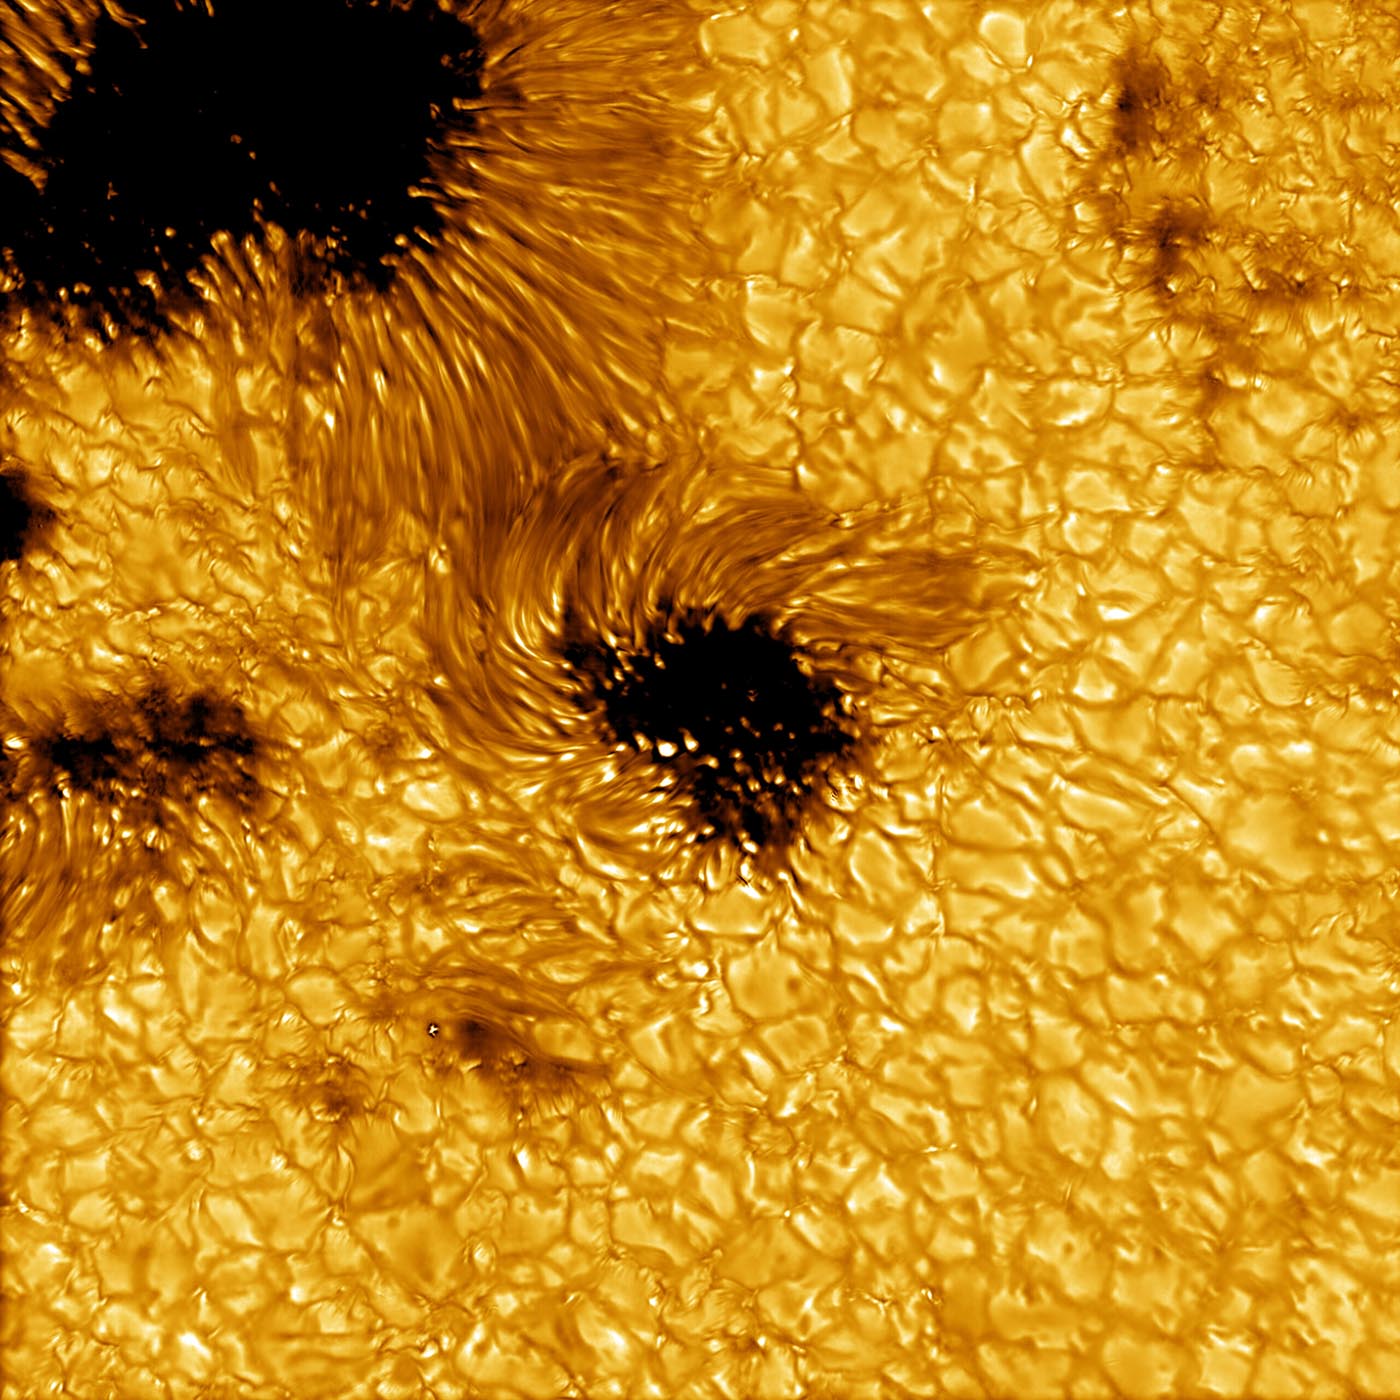 A newly released high-resolution image of solar sunspots captured by the Inouye Solar Telescope on May 11, 2021 (not from the first science observation). The data leading to this image were acquired with the Visible Broadband Imager blue channel at a wavelength of 450 nanometers.